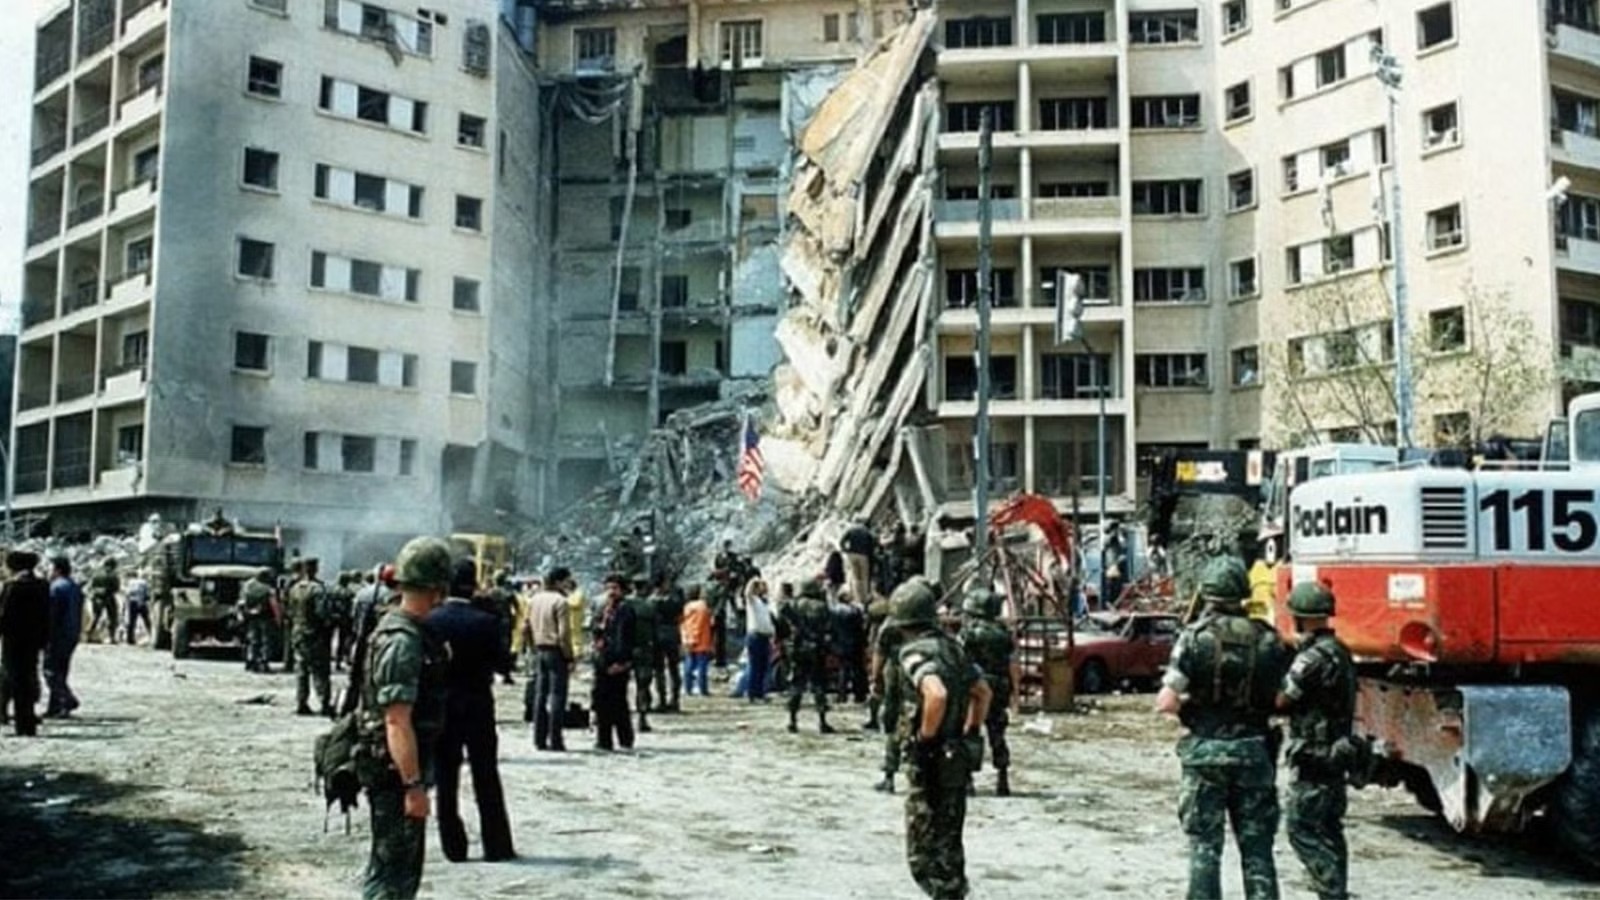 US judge orders Irans central bank to pay  bn to families of Beiruts  attack victims